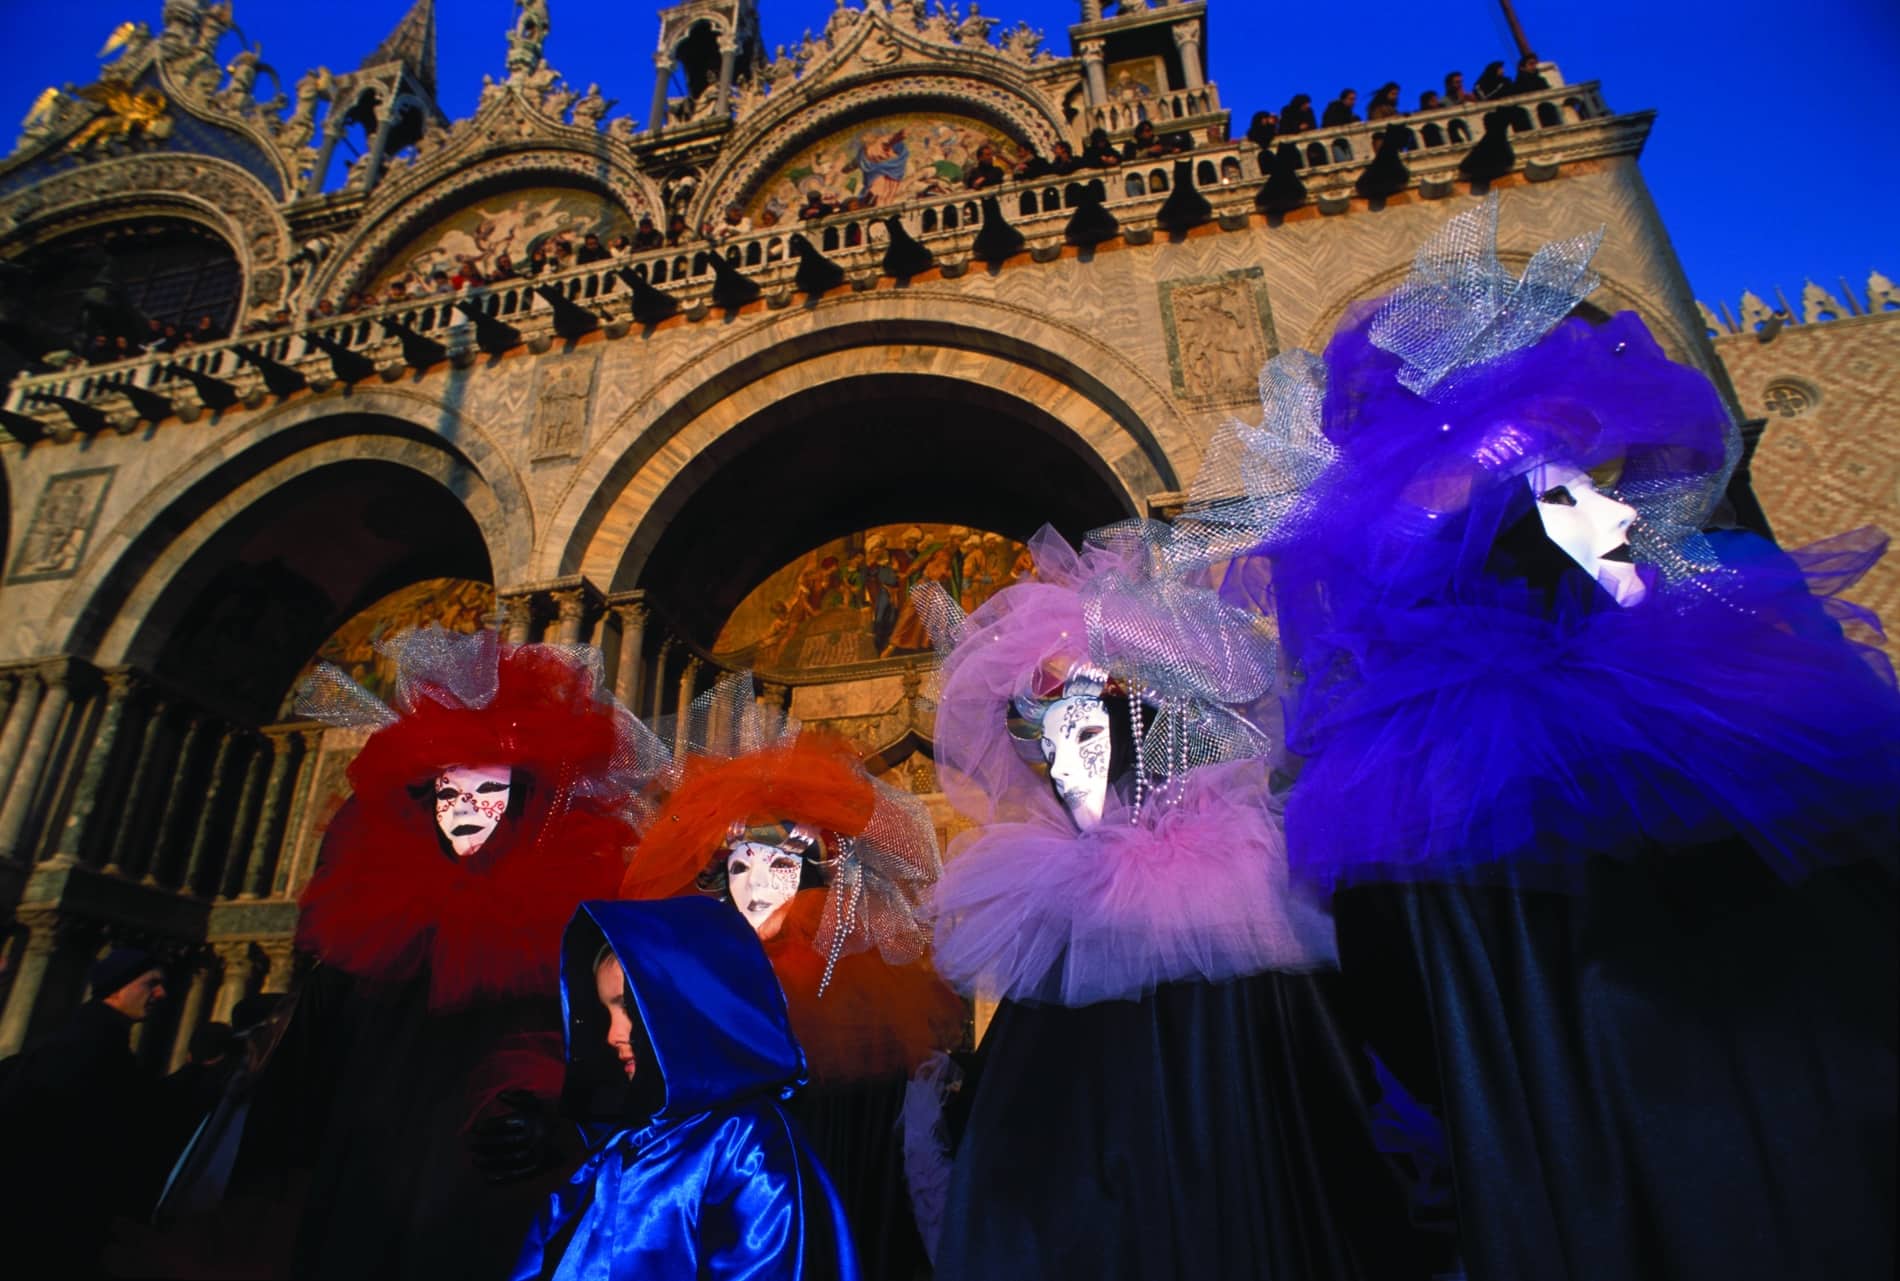 Carnevale traditional masks in Venice, Italy reflect Mardi Gras history